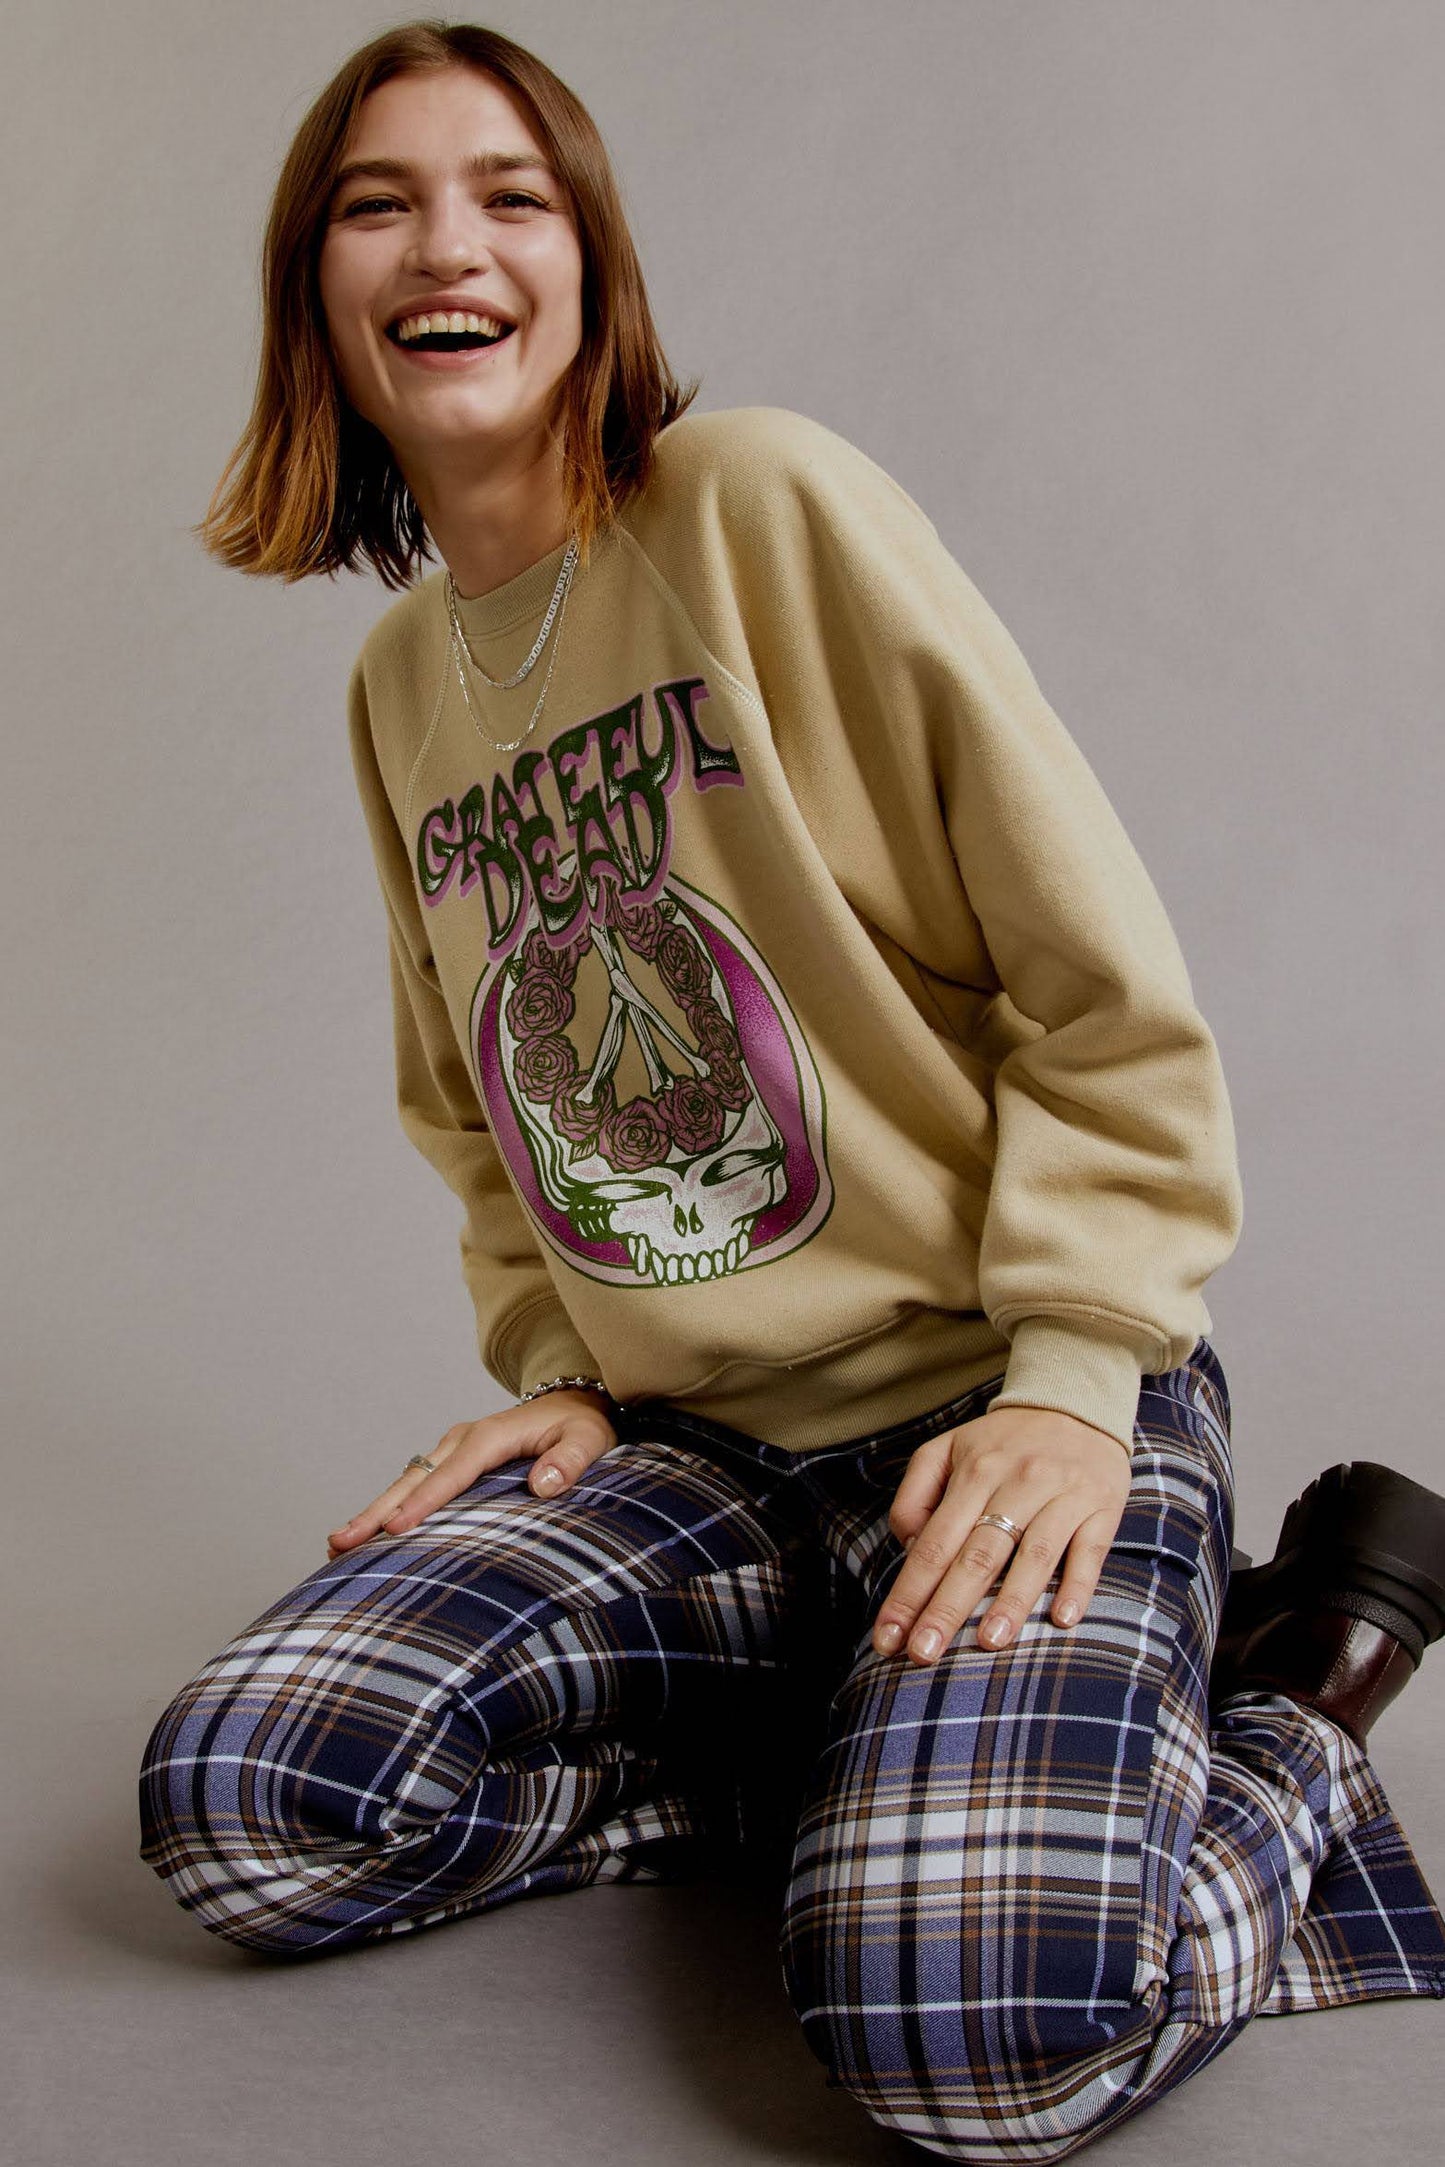 A brown-haired model wearing a khaki tee featuring a hand-drawn rendition of a skull and roses graphic is the lead focal point, accented with the group’s logo in trippy letters and a pop of pink